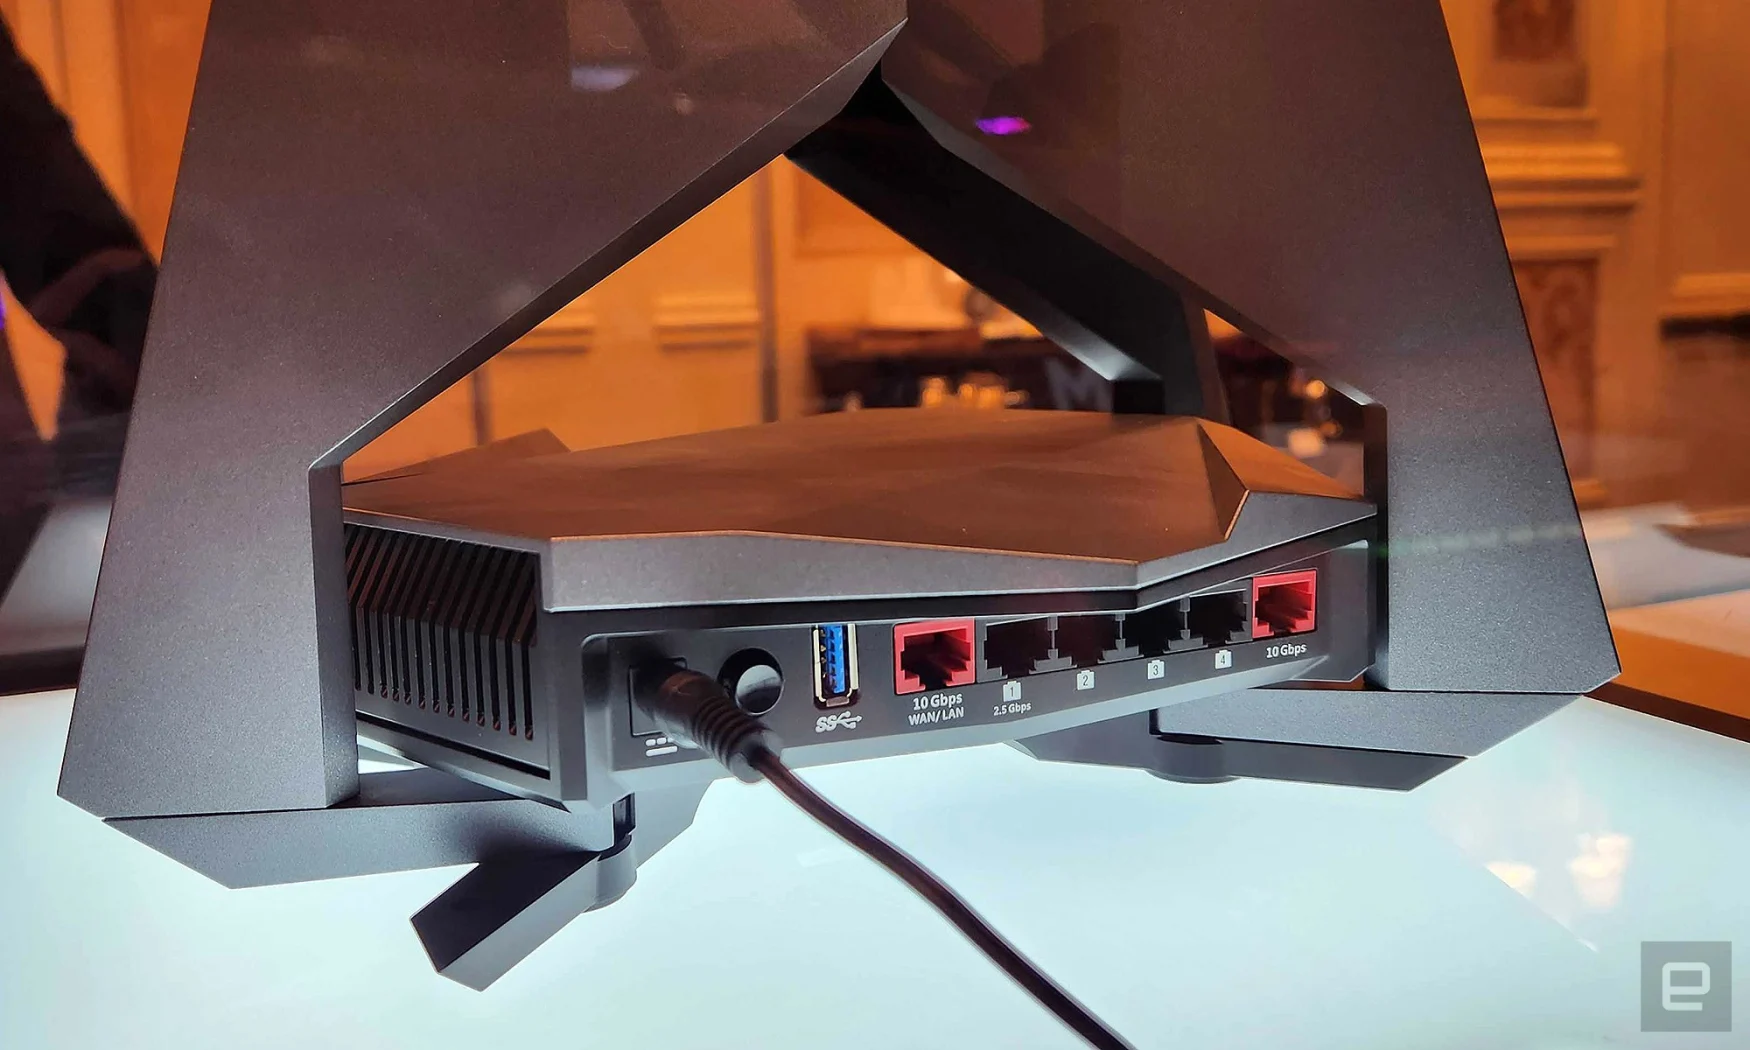 For people who still care about wired internet connections, the RadiX BE22000 Turbo also includes two 10 gigabit Ethernet ports along with four 2.5 gigabit jacks. 